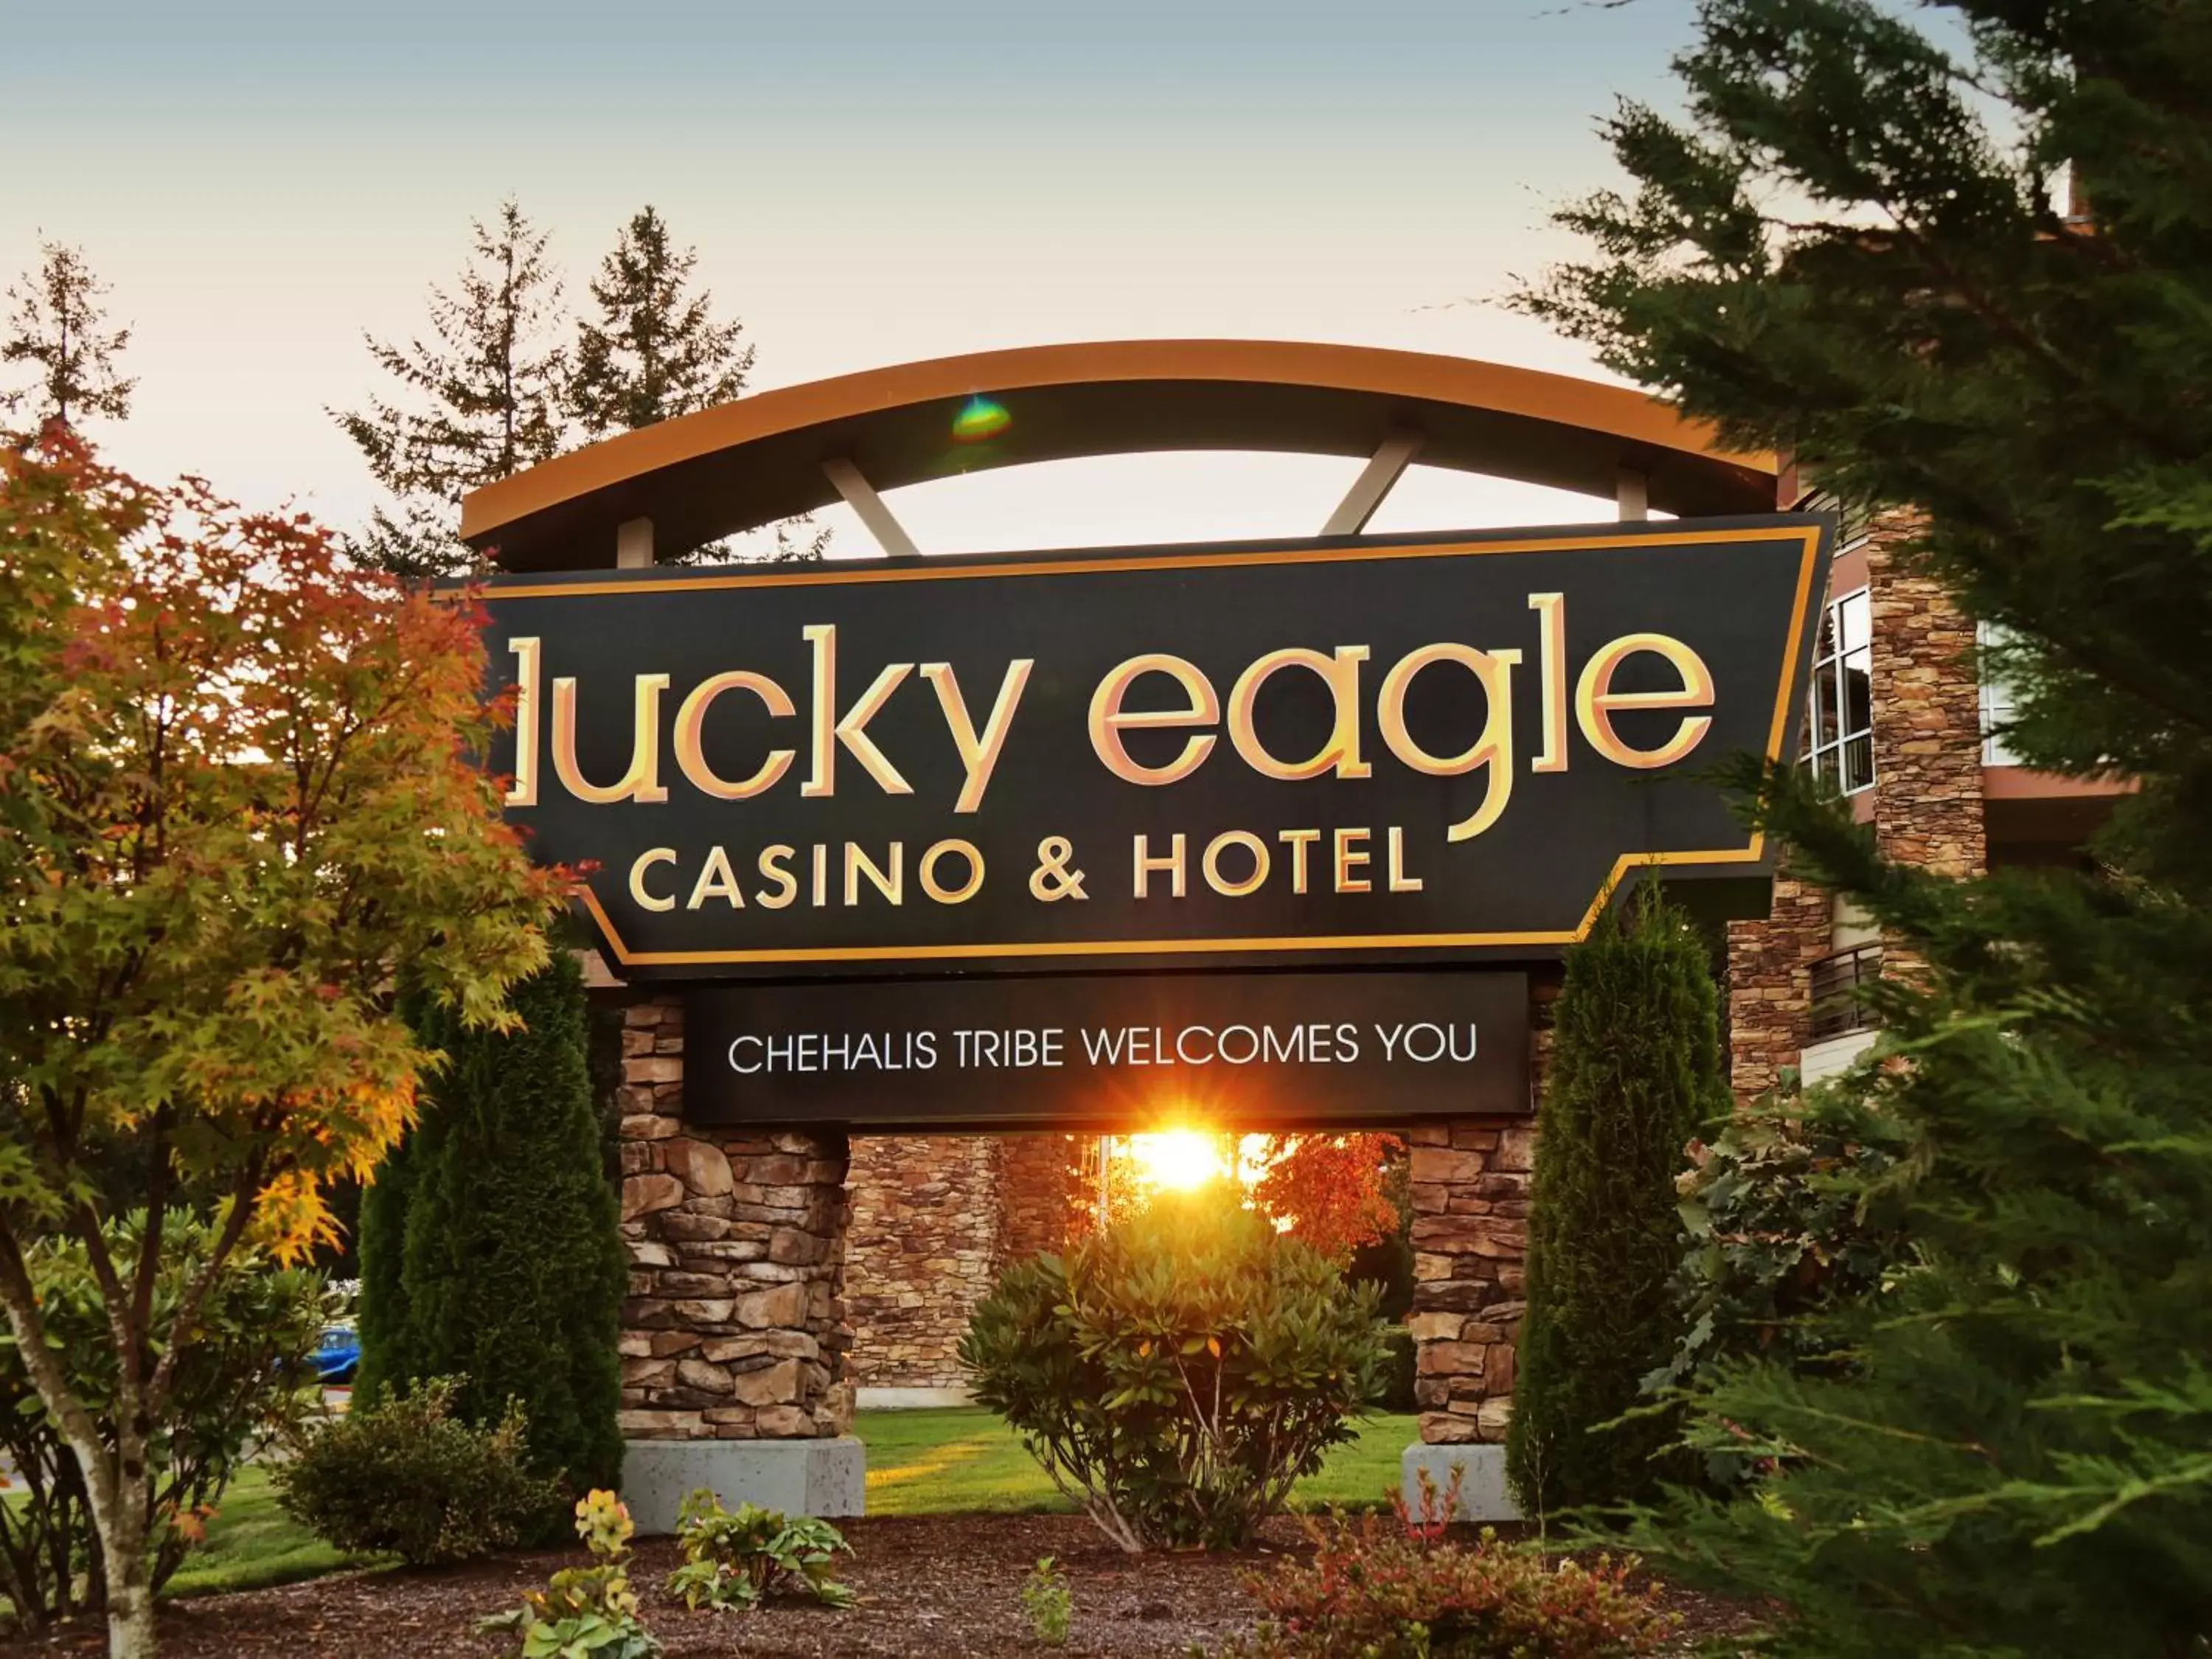 Property logo or sign in Lucky Eagle Casino & Hotel